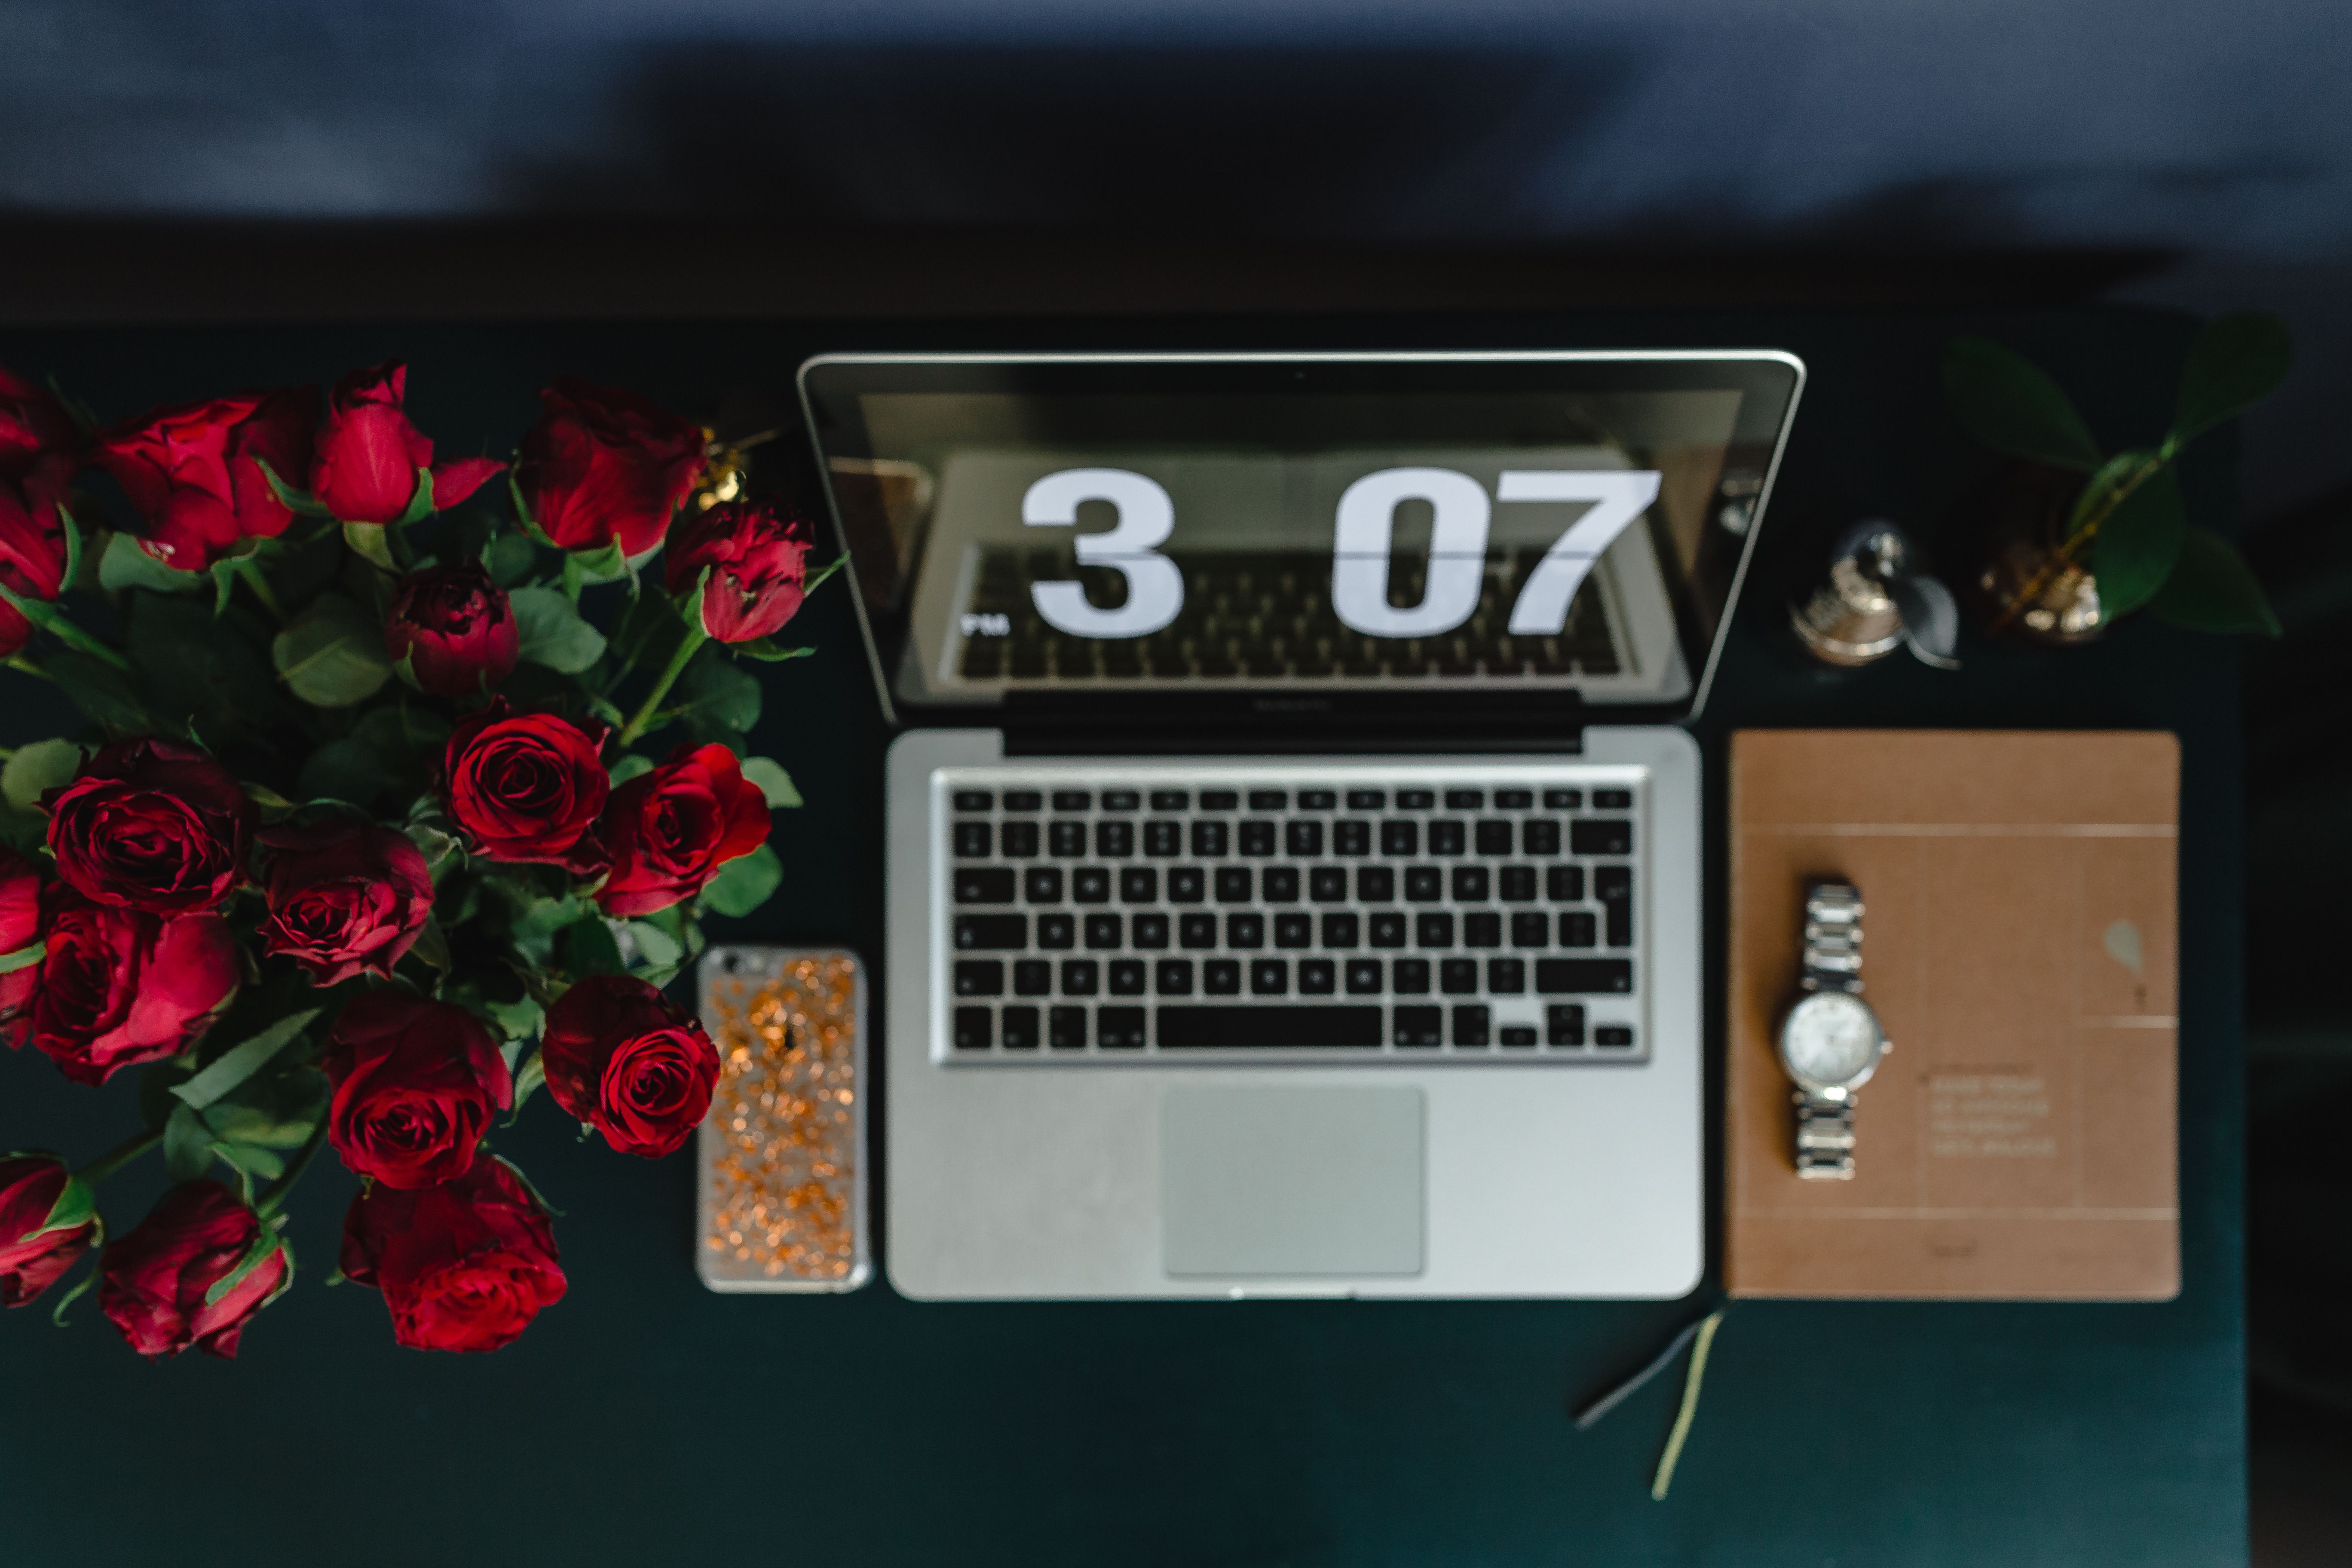 Office Desk Table With Red Roses